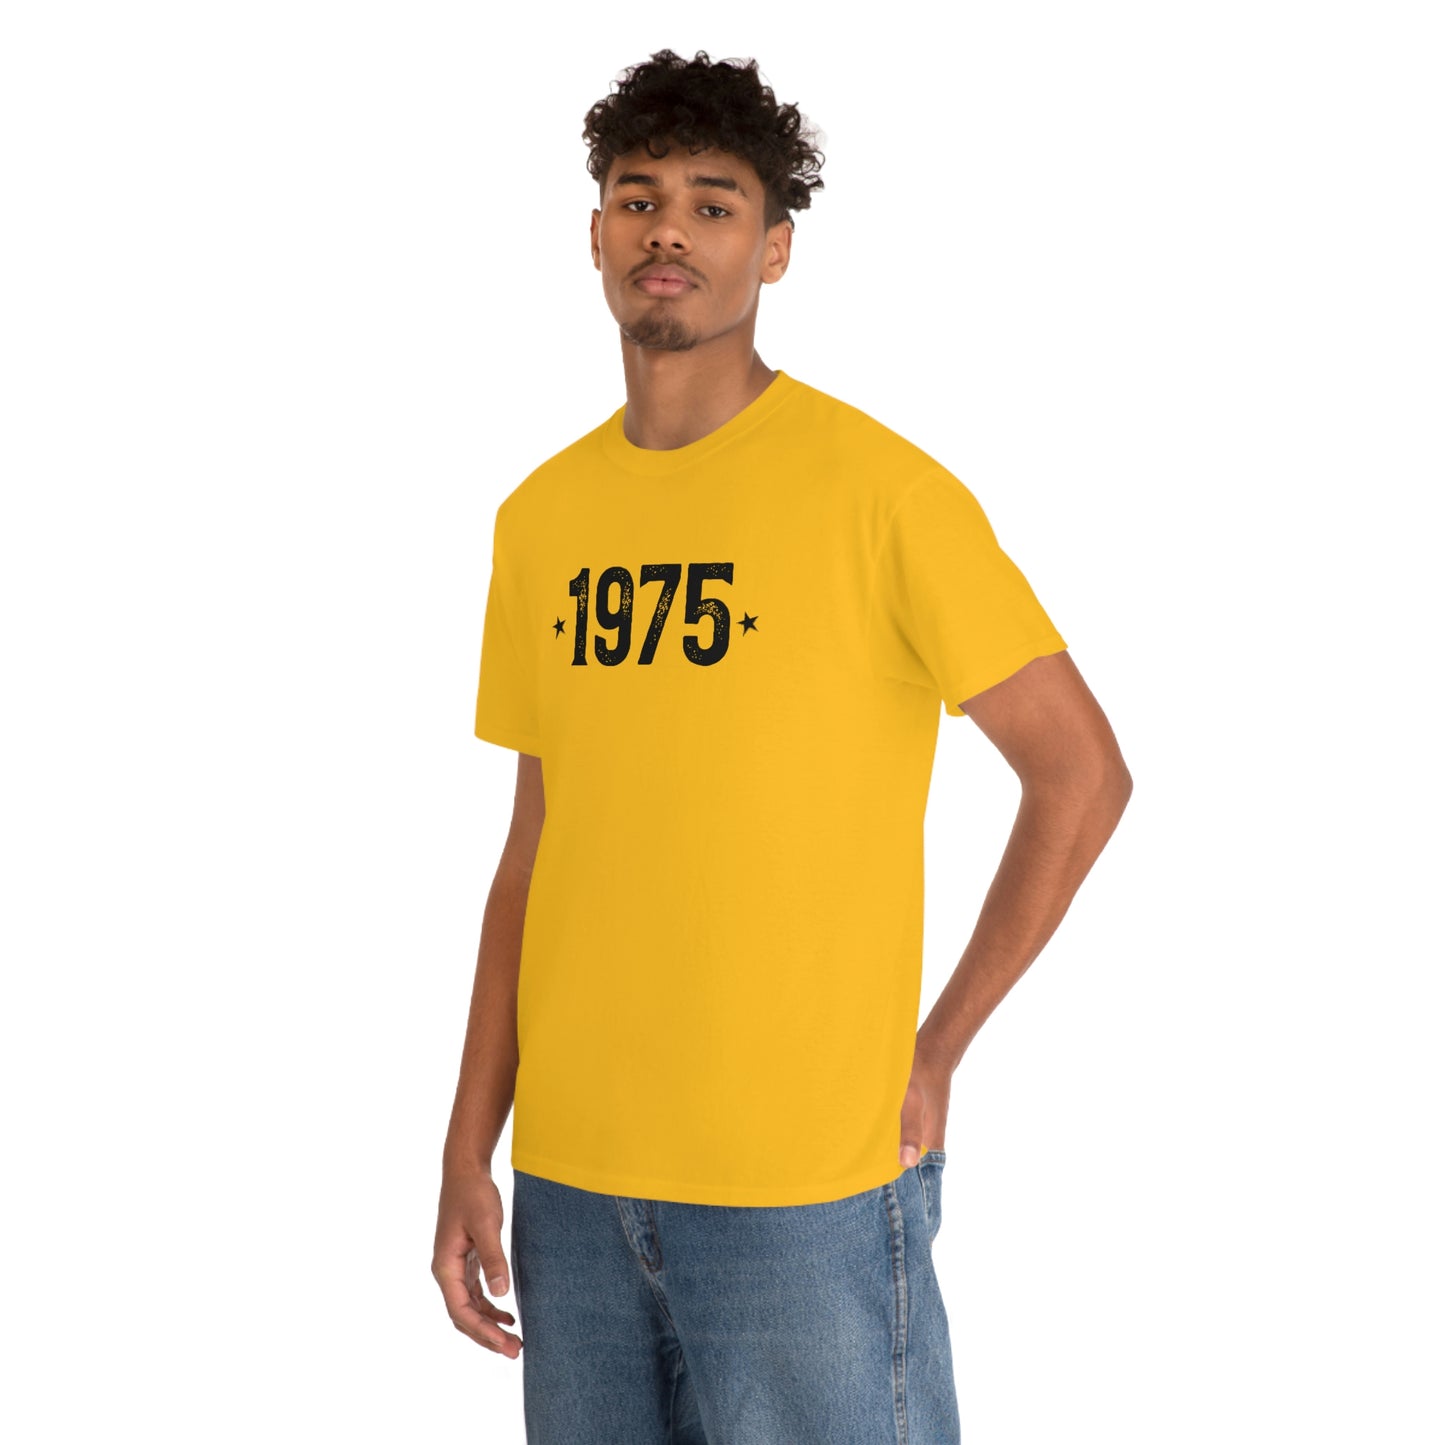 "1975 Birthday Year" T-Shirt - Weave Got Gifts - Unique Gifts You Won’t Find Anywhere Else!